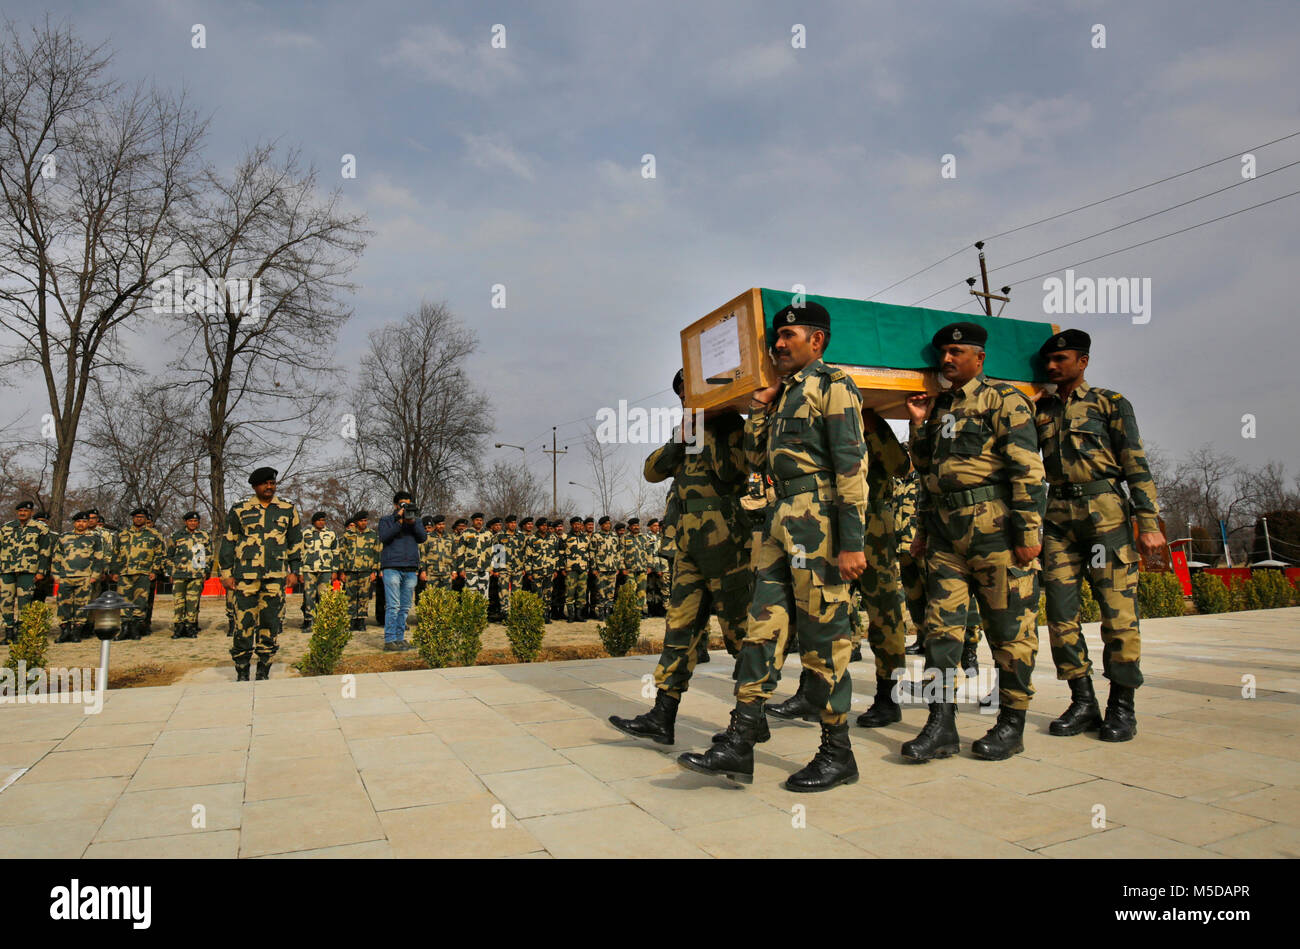 Srinagar, Indian-controlled Kashmir. 22nd Feb, 2018. Border guards of India's Border Security Force (BSF) carry the coffin of their colleague during his wreath laying ceremony at their base camp in outskirts of Srinagar city, the summer capital of Indian-controlled Kashmir, Feb. 22, 2018. A border guard of India's BSF has been killed in firing at Tanghdar sector in frontier Kupwara district on Line of Control (LoC) dividing Kashmir. Credit: Javed Dar/Xinhua/Alamy Live News Stock Photo